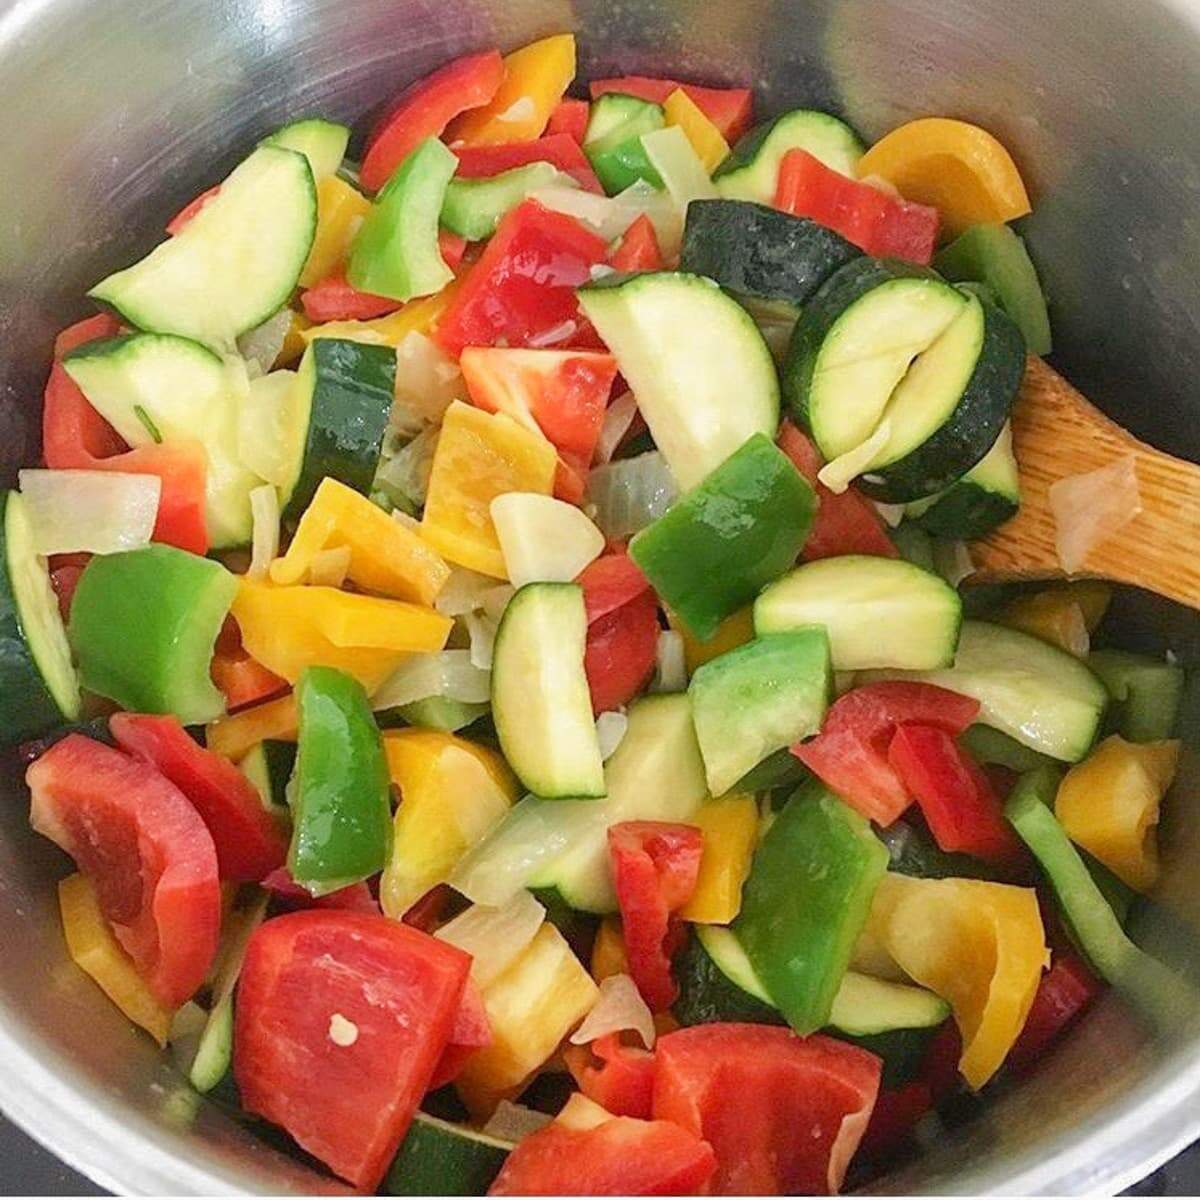 Chunky chopped courgettes (zucchini), red, yellow and green peppers with sautéed onions ready for soup making in a large pan.